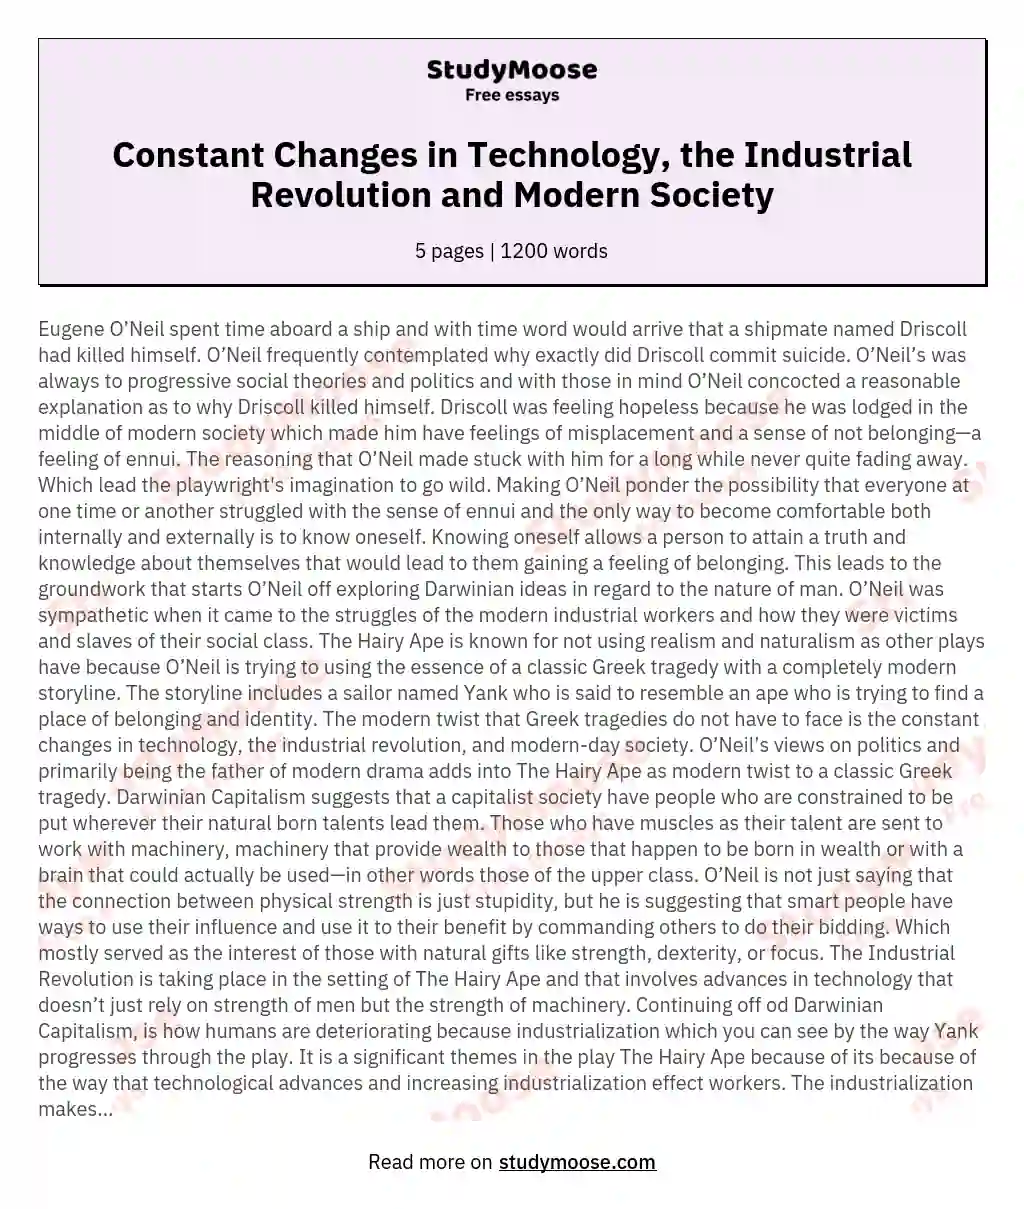 Constant Changes in Technology, the Industrial Revolution and Modern Society essay